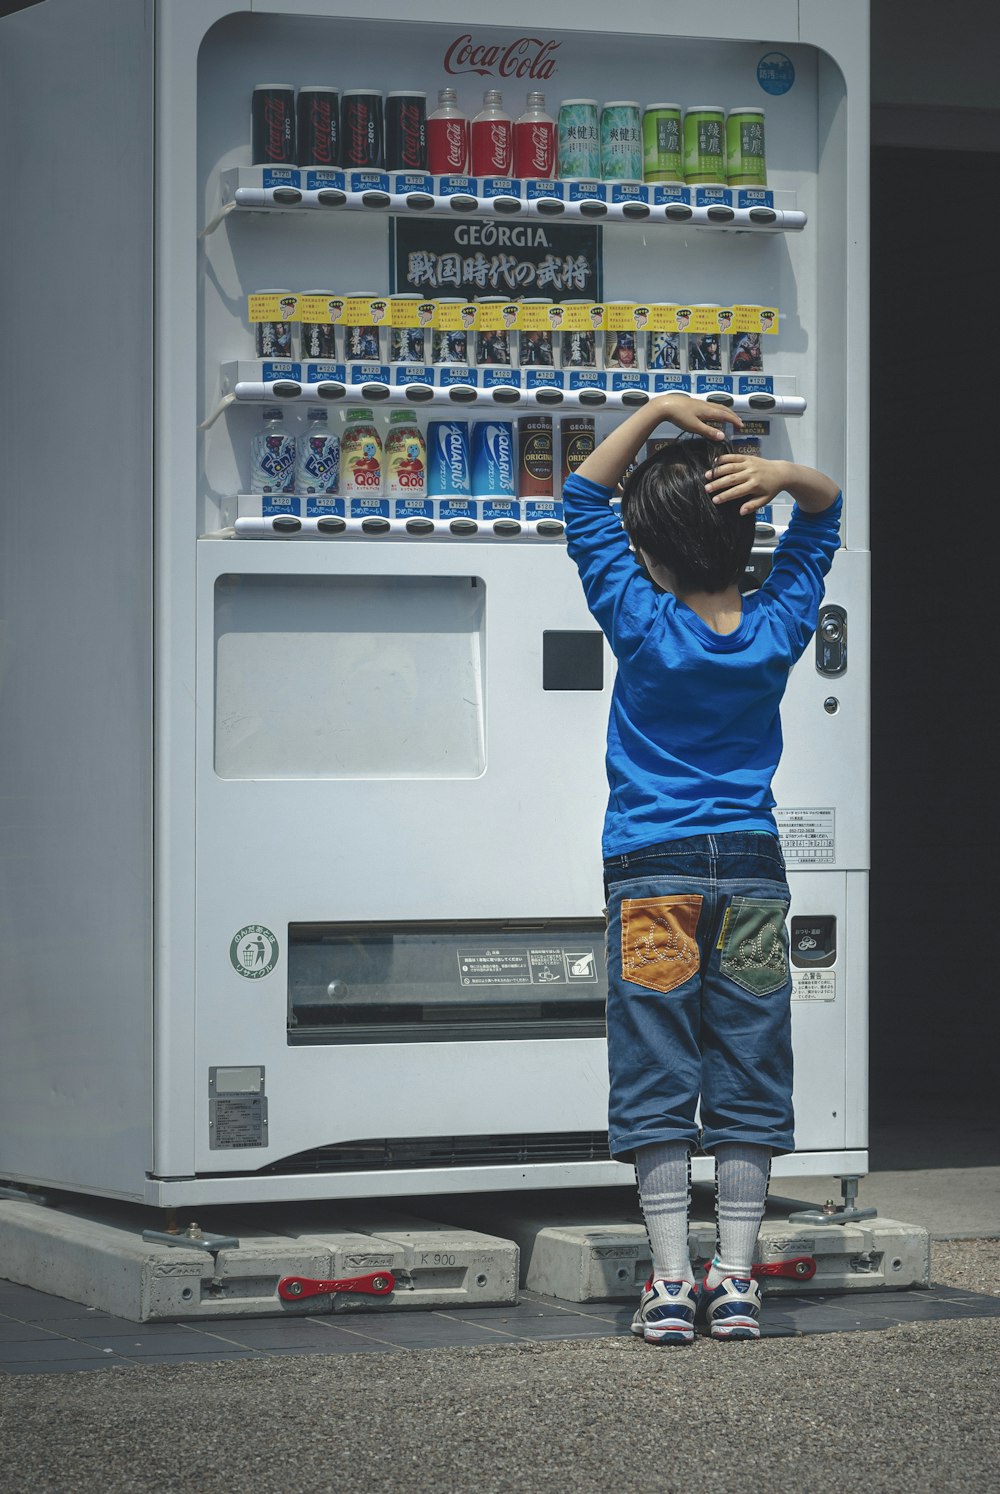 a young boy standing in front of a vending machine